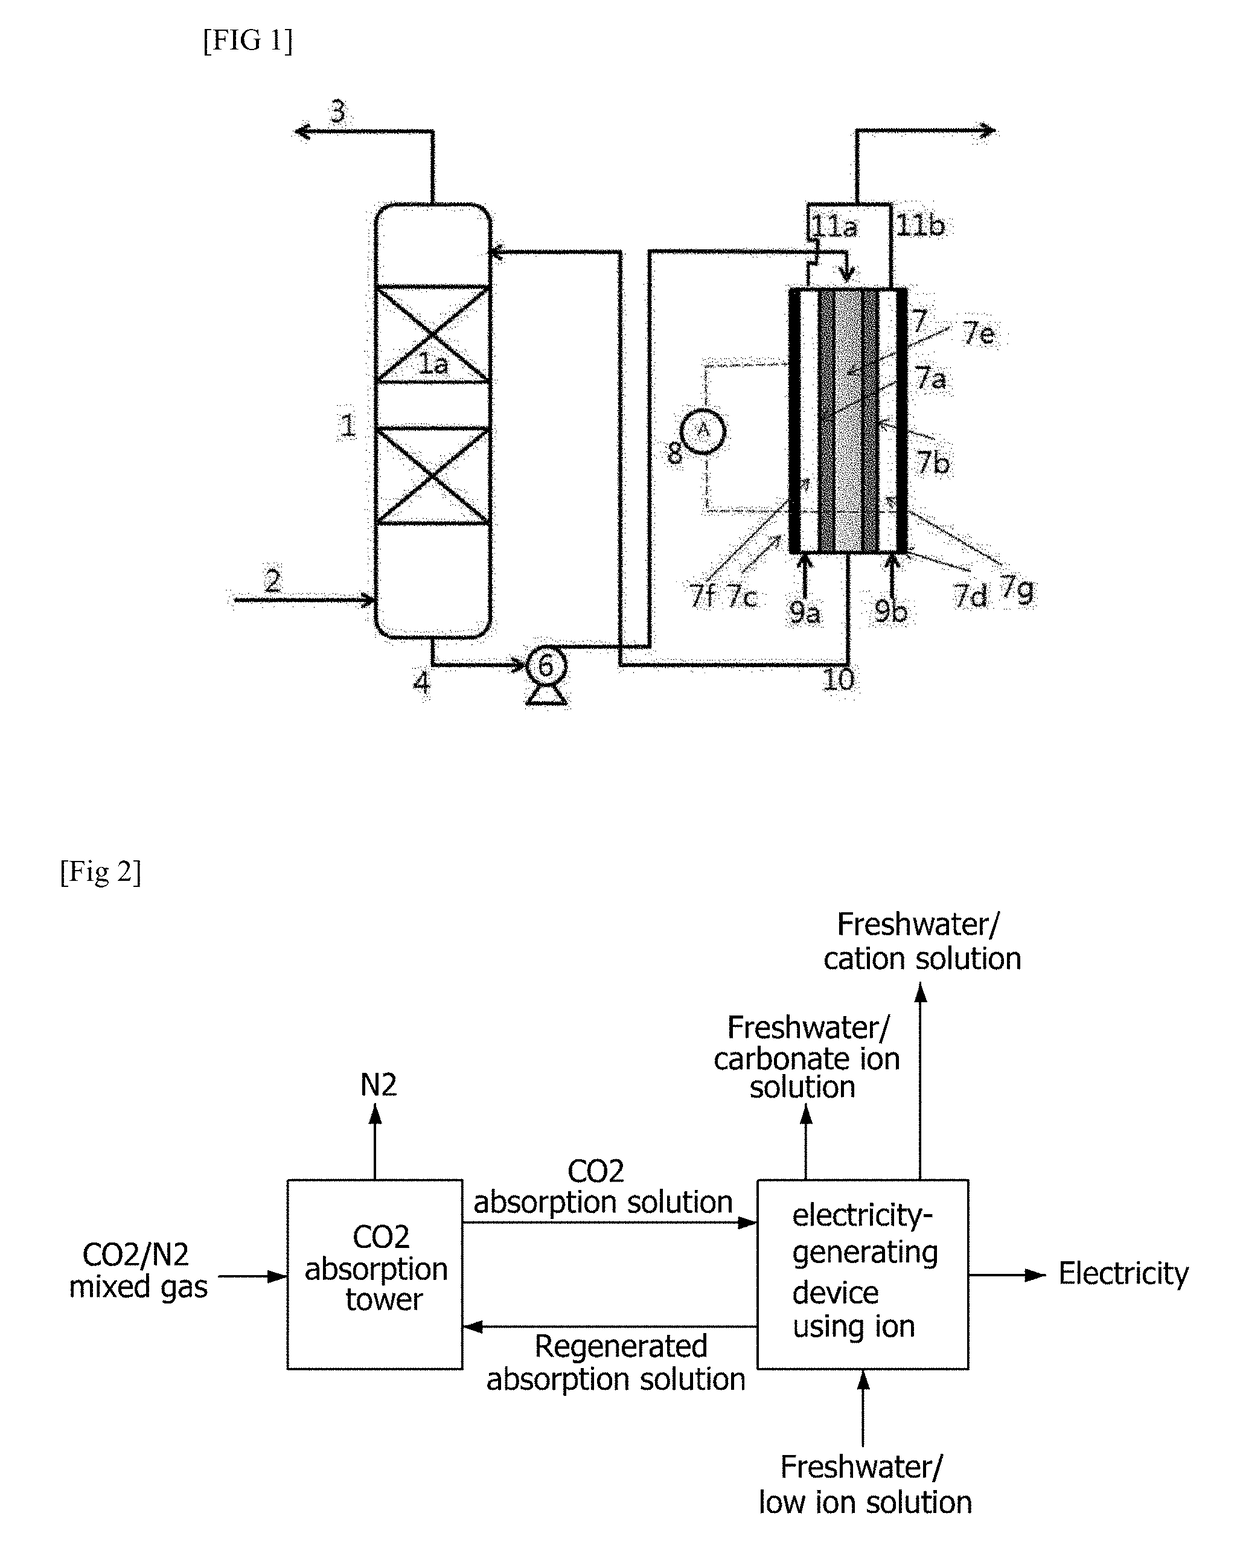 Carbon dioxide trapping device and method capable of producing electricity